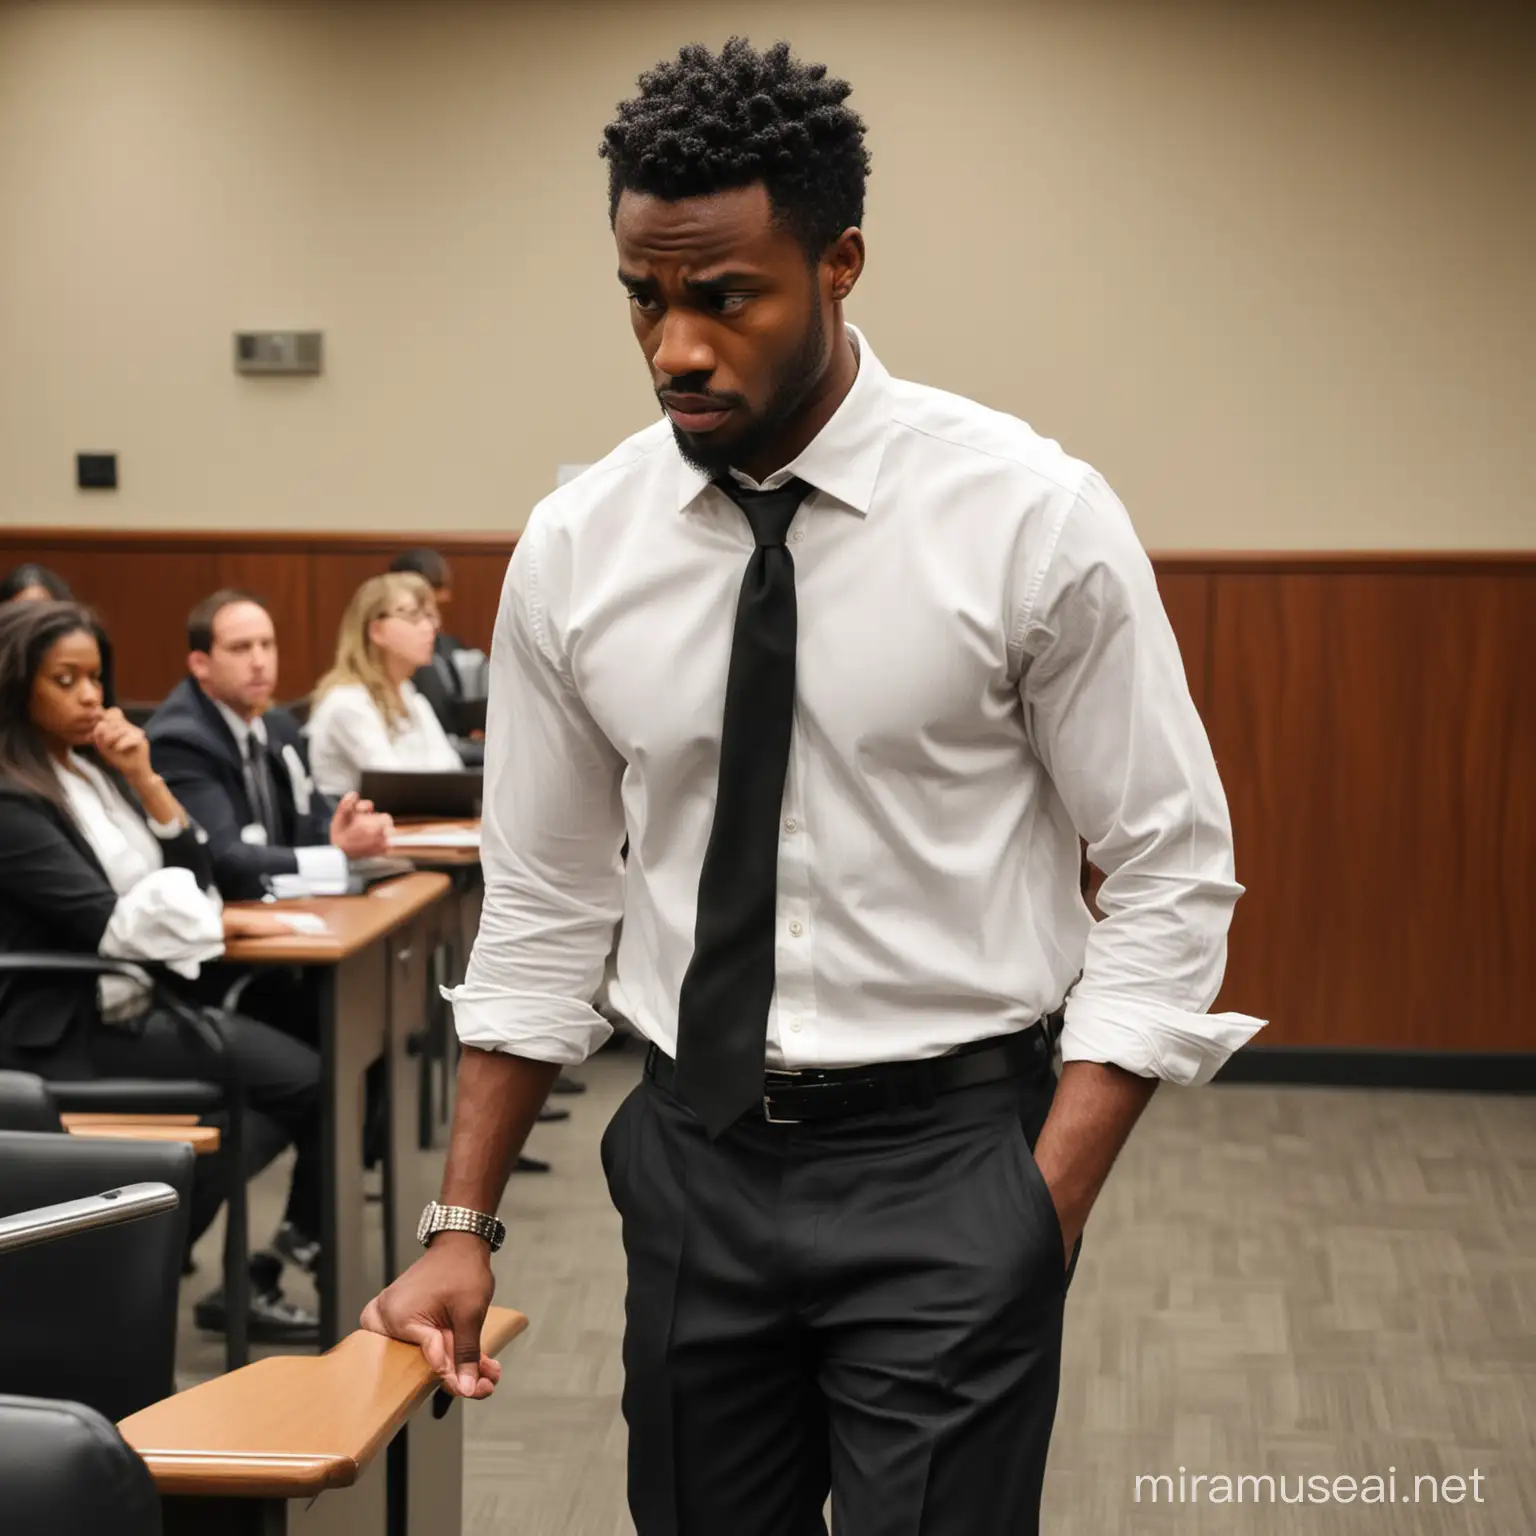 Angry Black Man in Jury Room with Disheveled Attire